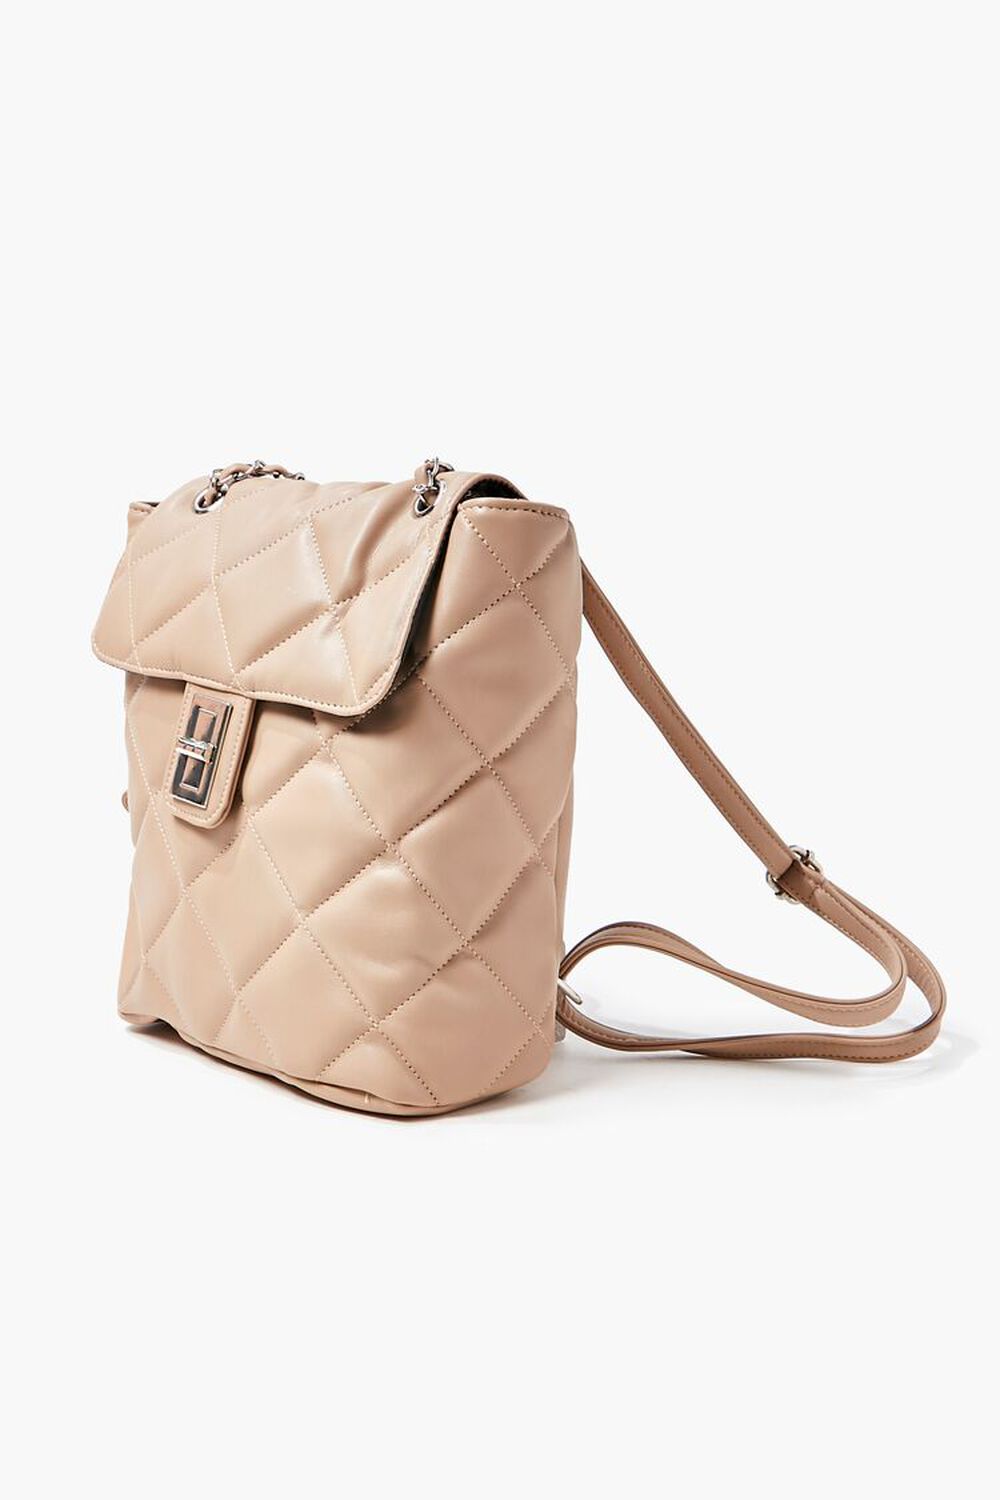 TAUPE Quilted Faux Leather Backpack, image 2